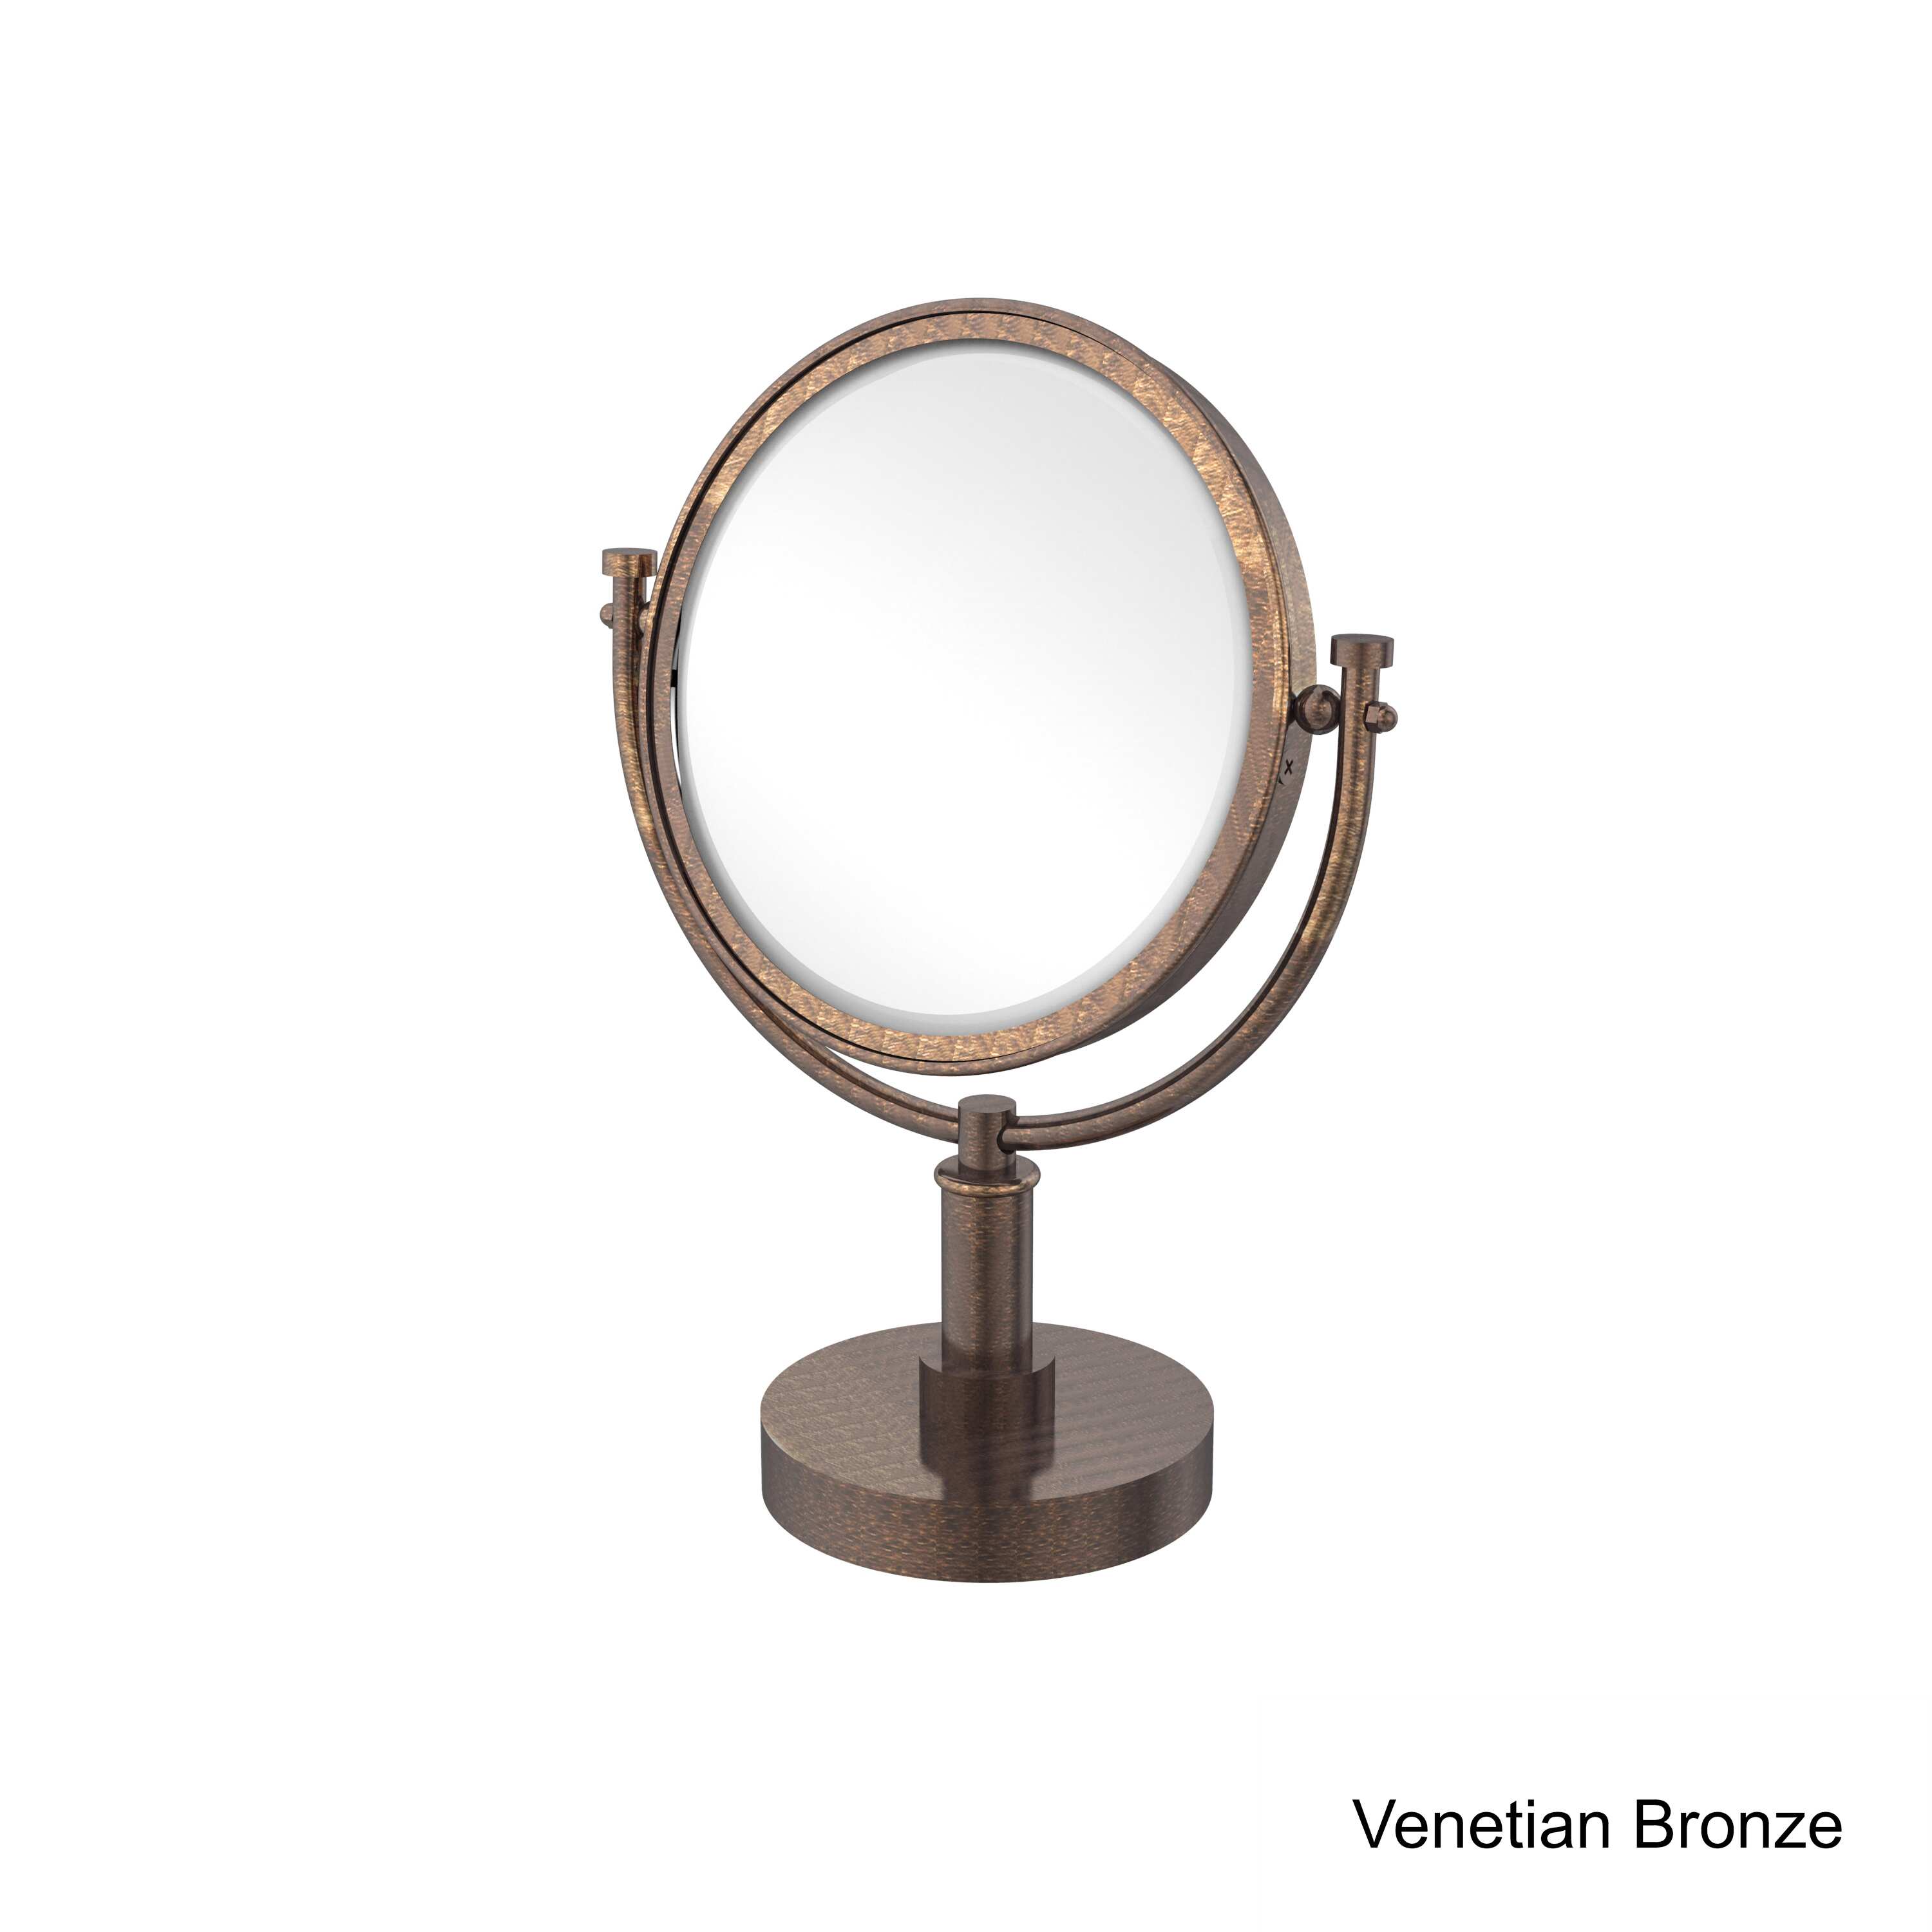 Allied Brass 8 Inch Vanity Top Make-Up Mirror 4X Magnification